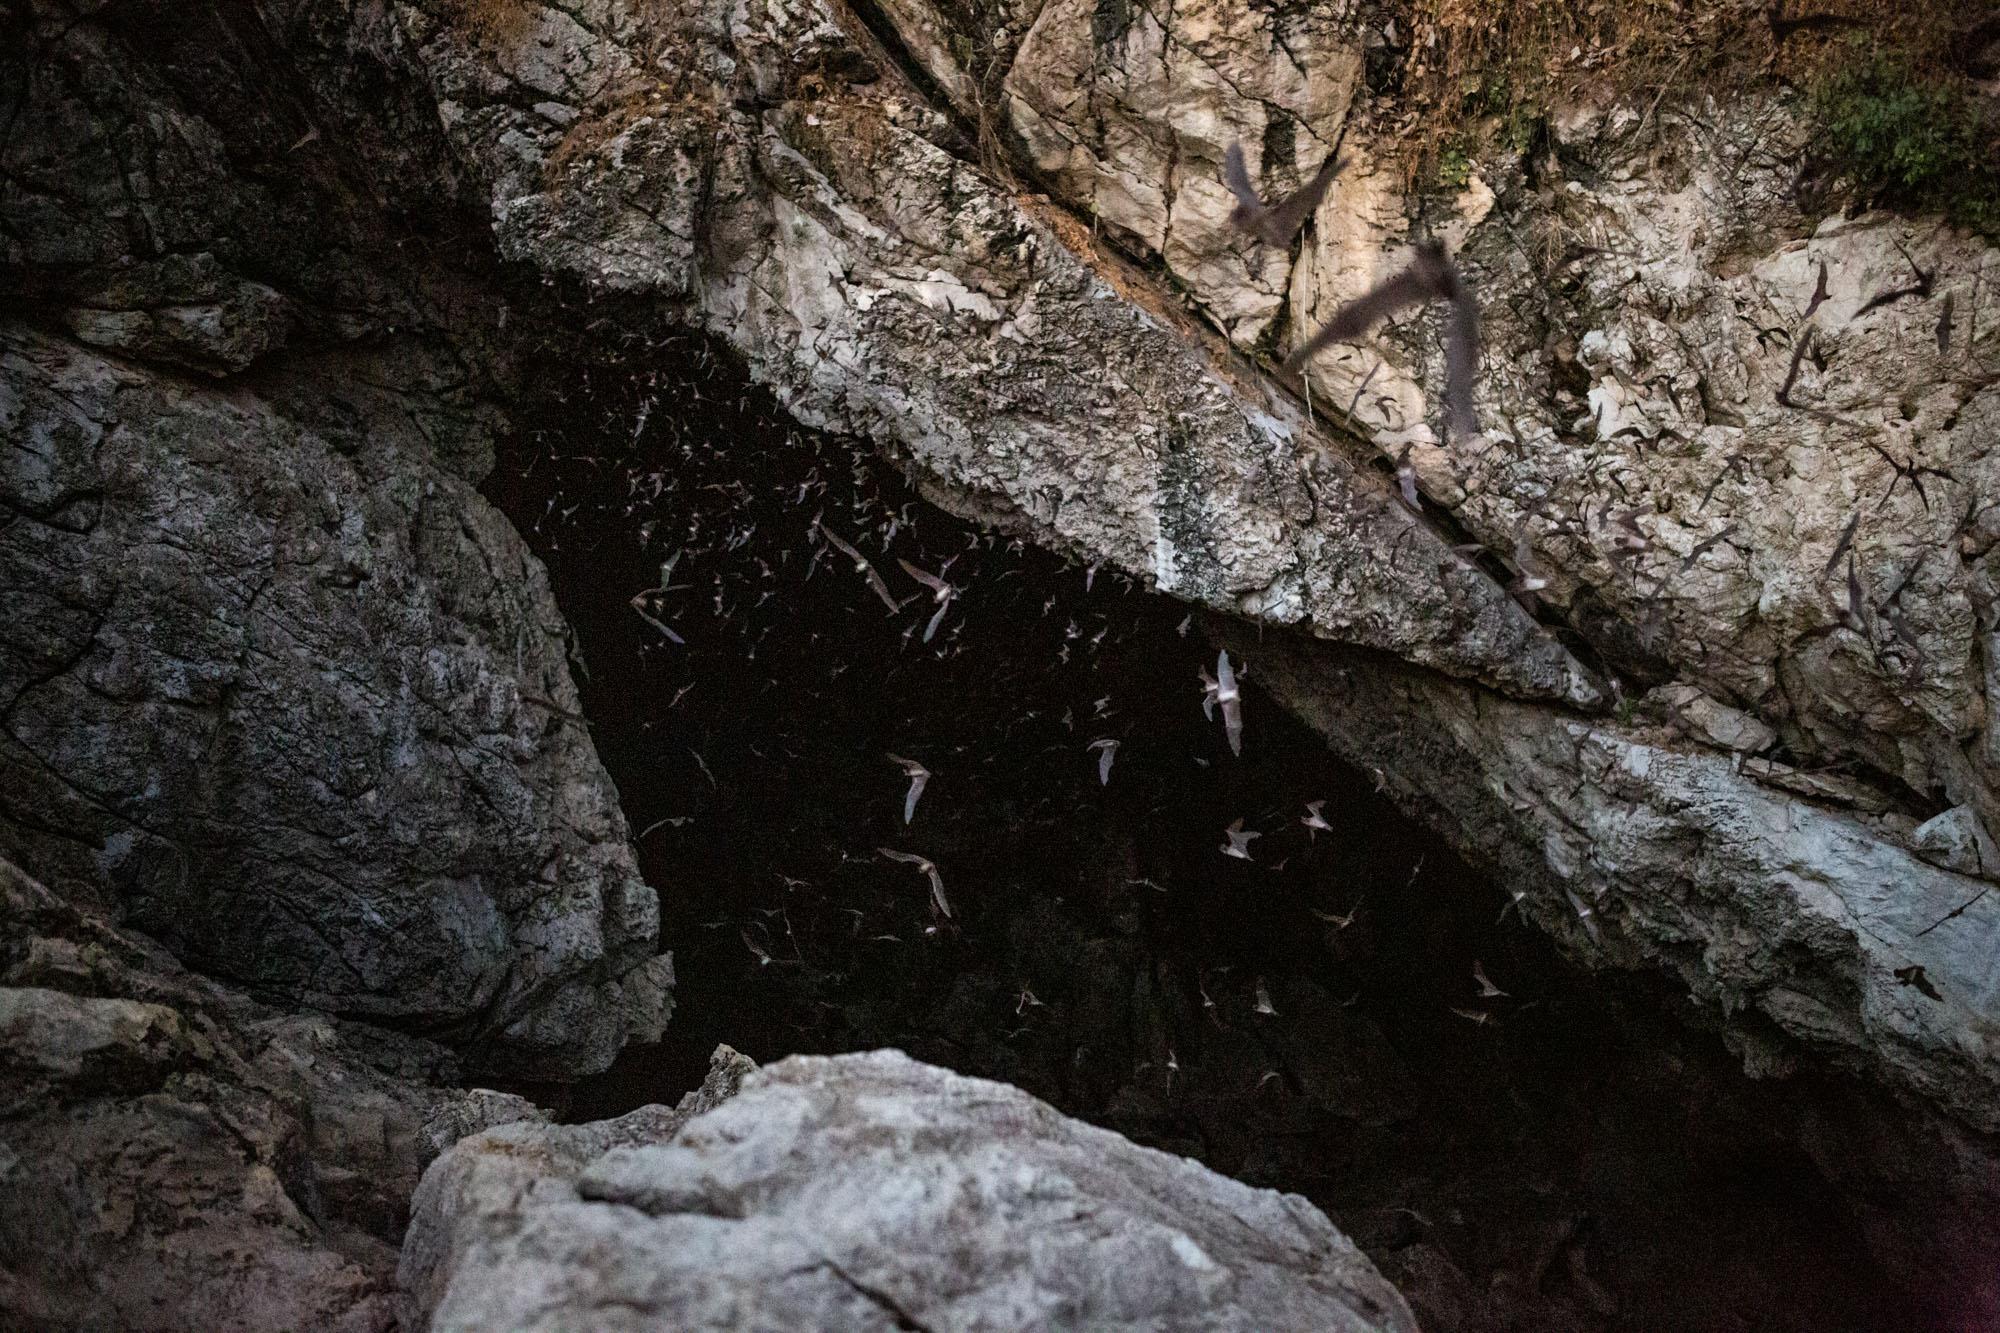 Origins, Understanding Covid-19: Bloomberg - Bats stream out of a crevice to feed at dusk at the Khao...